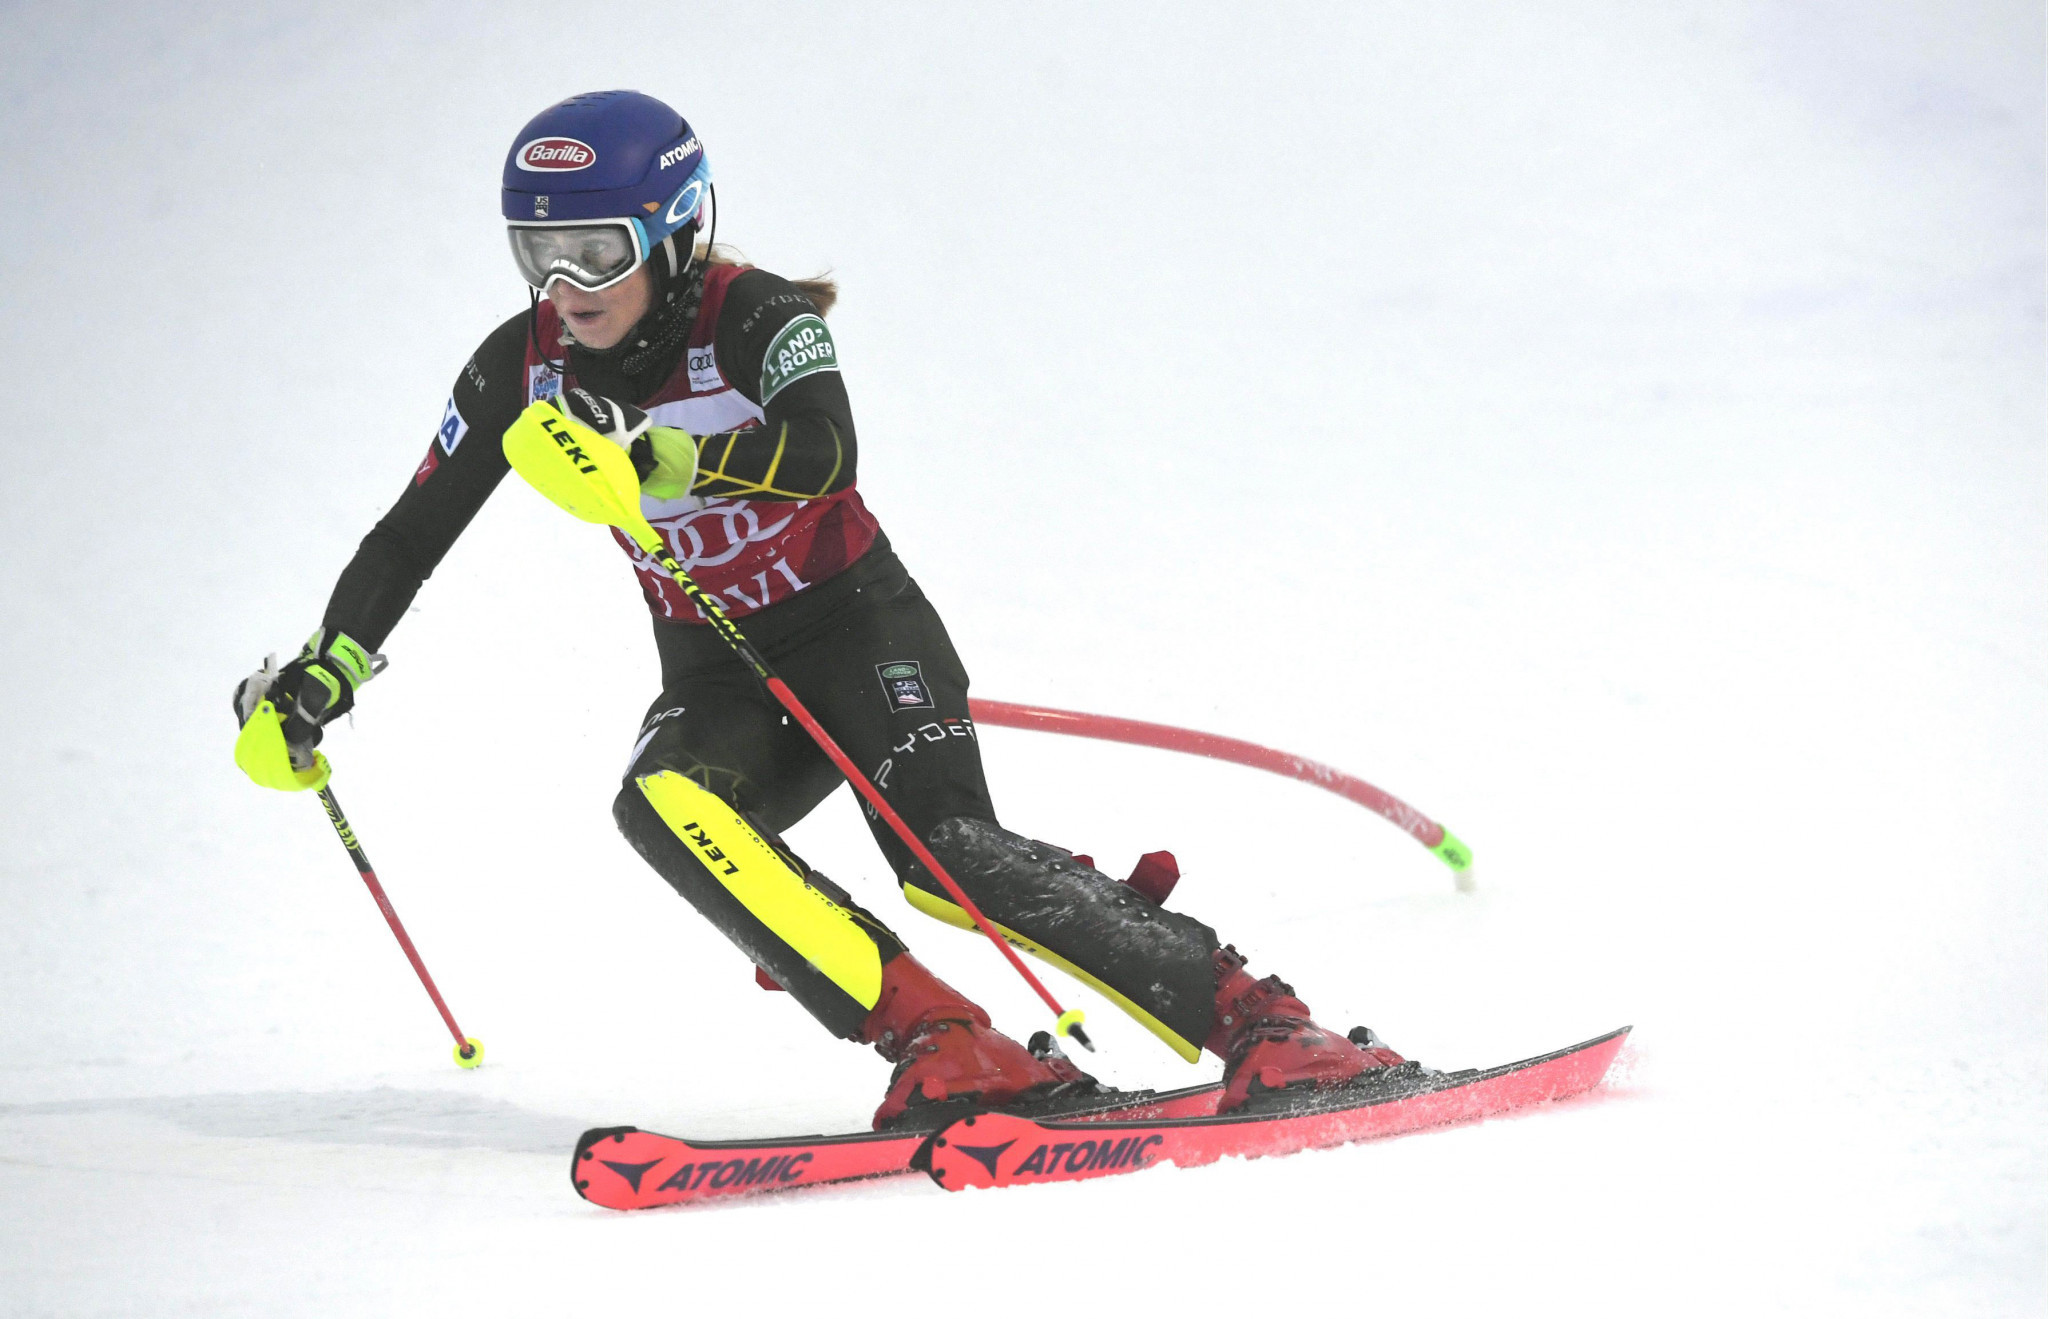 Mikaela Shiffrin recorded her first victory of the season in Levi ©Getty Images